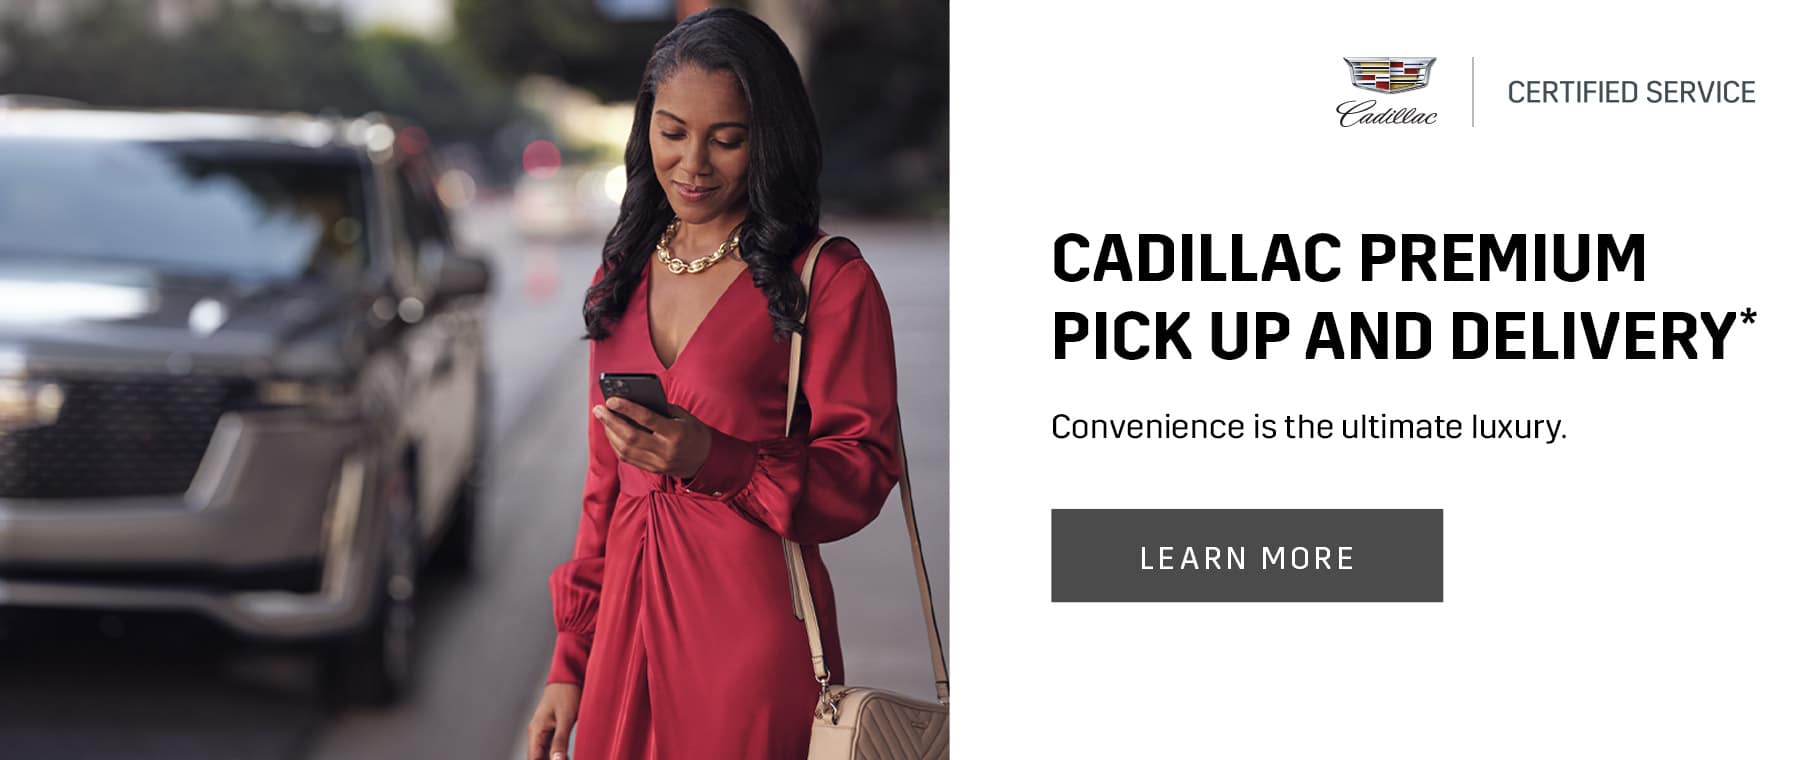 CADILLAC PREMIUM PICK UP AND DELIVERY* Convenience is the ultimate luxury. 